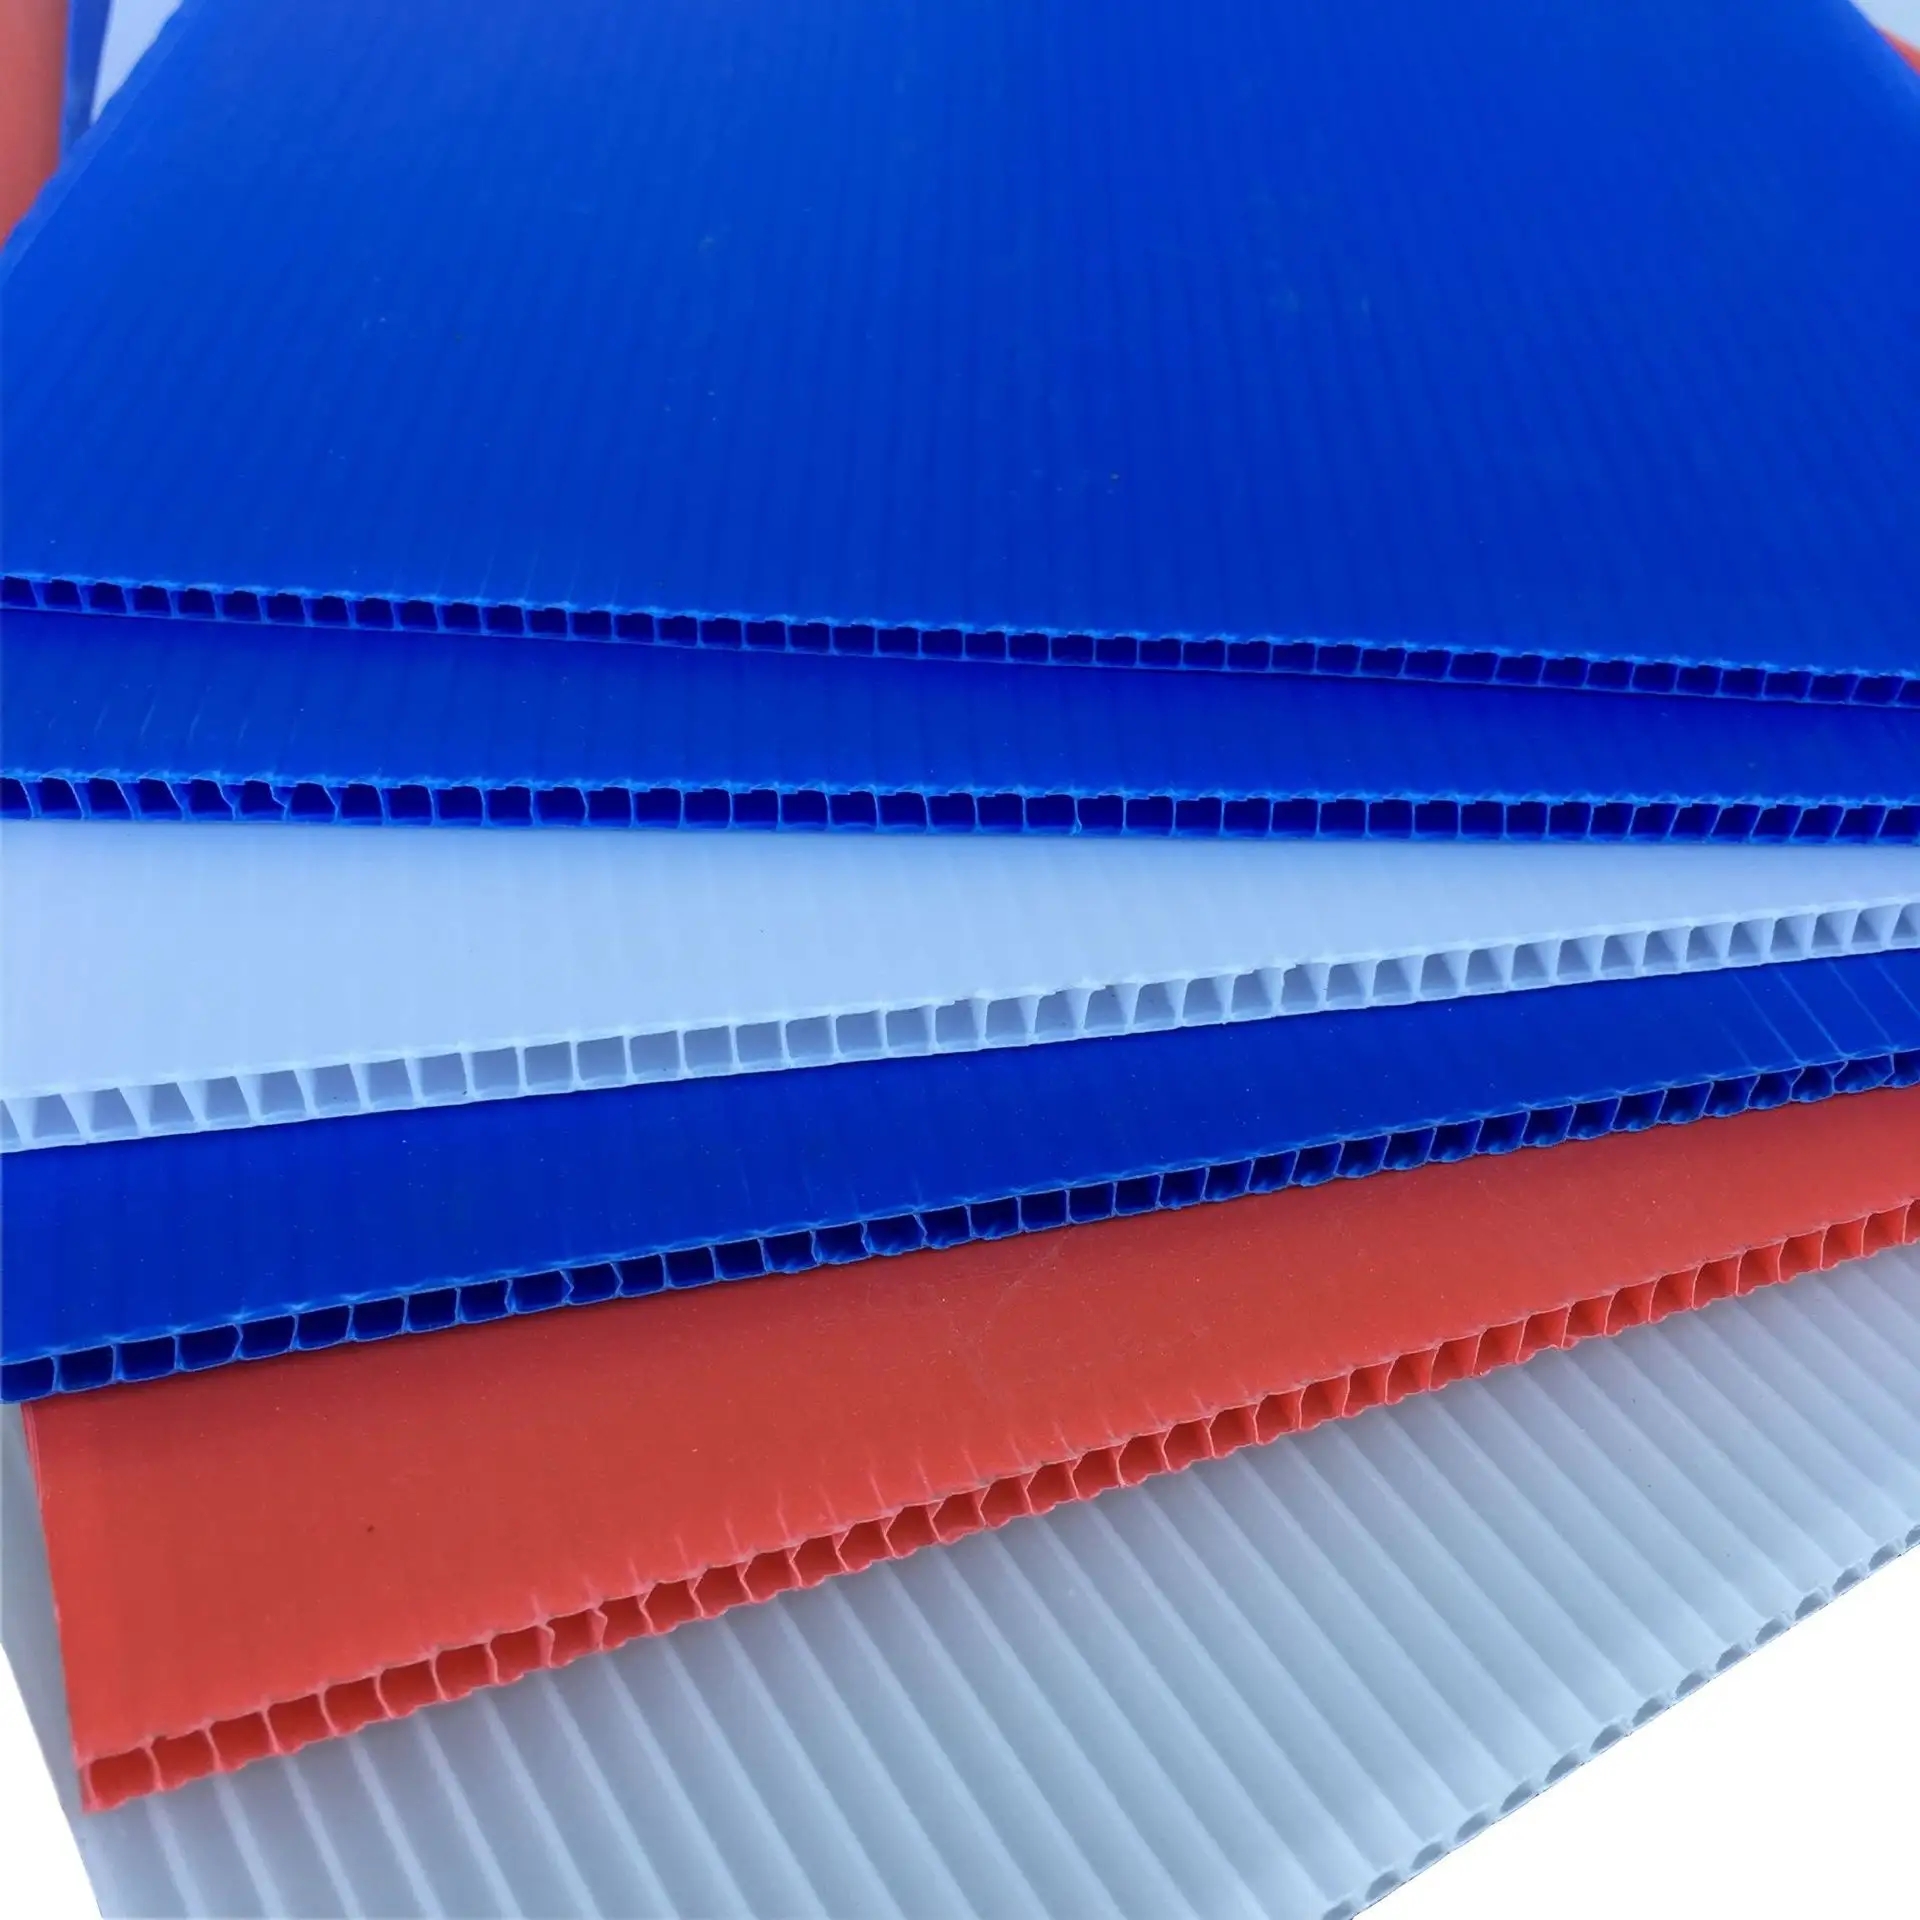 The function of corrugated plastic sheets